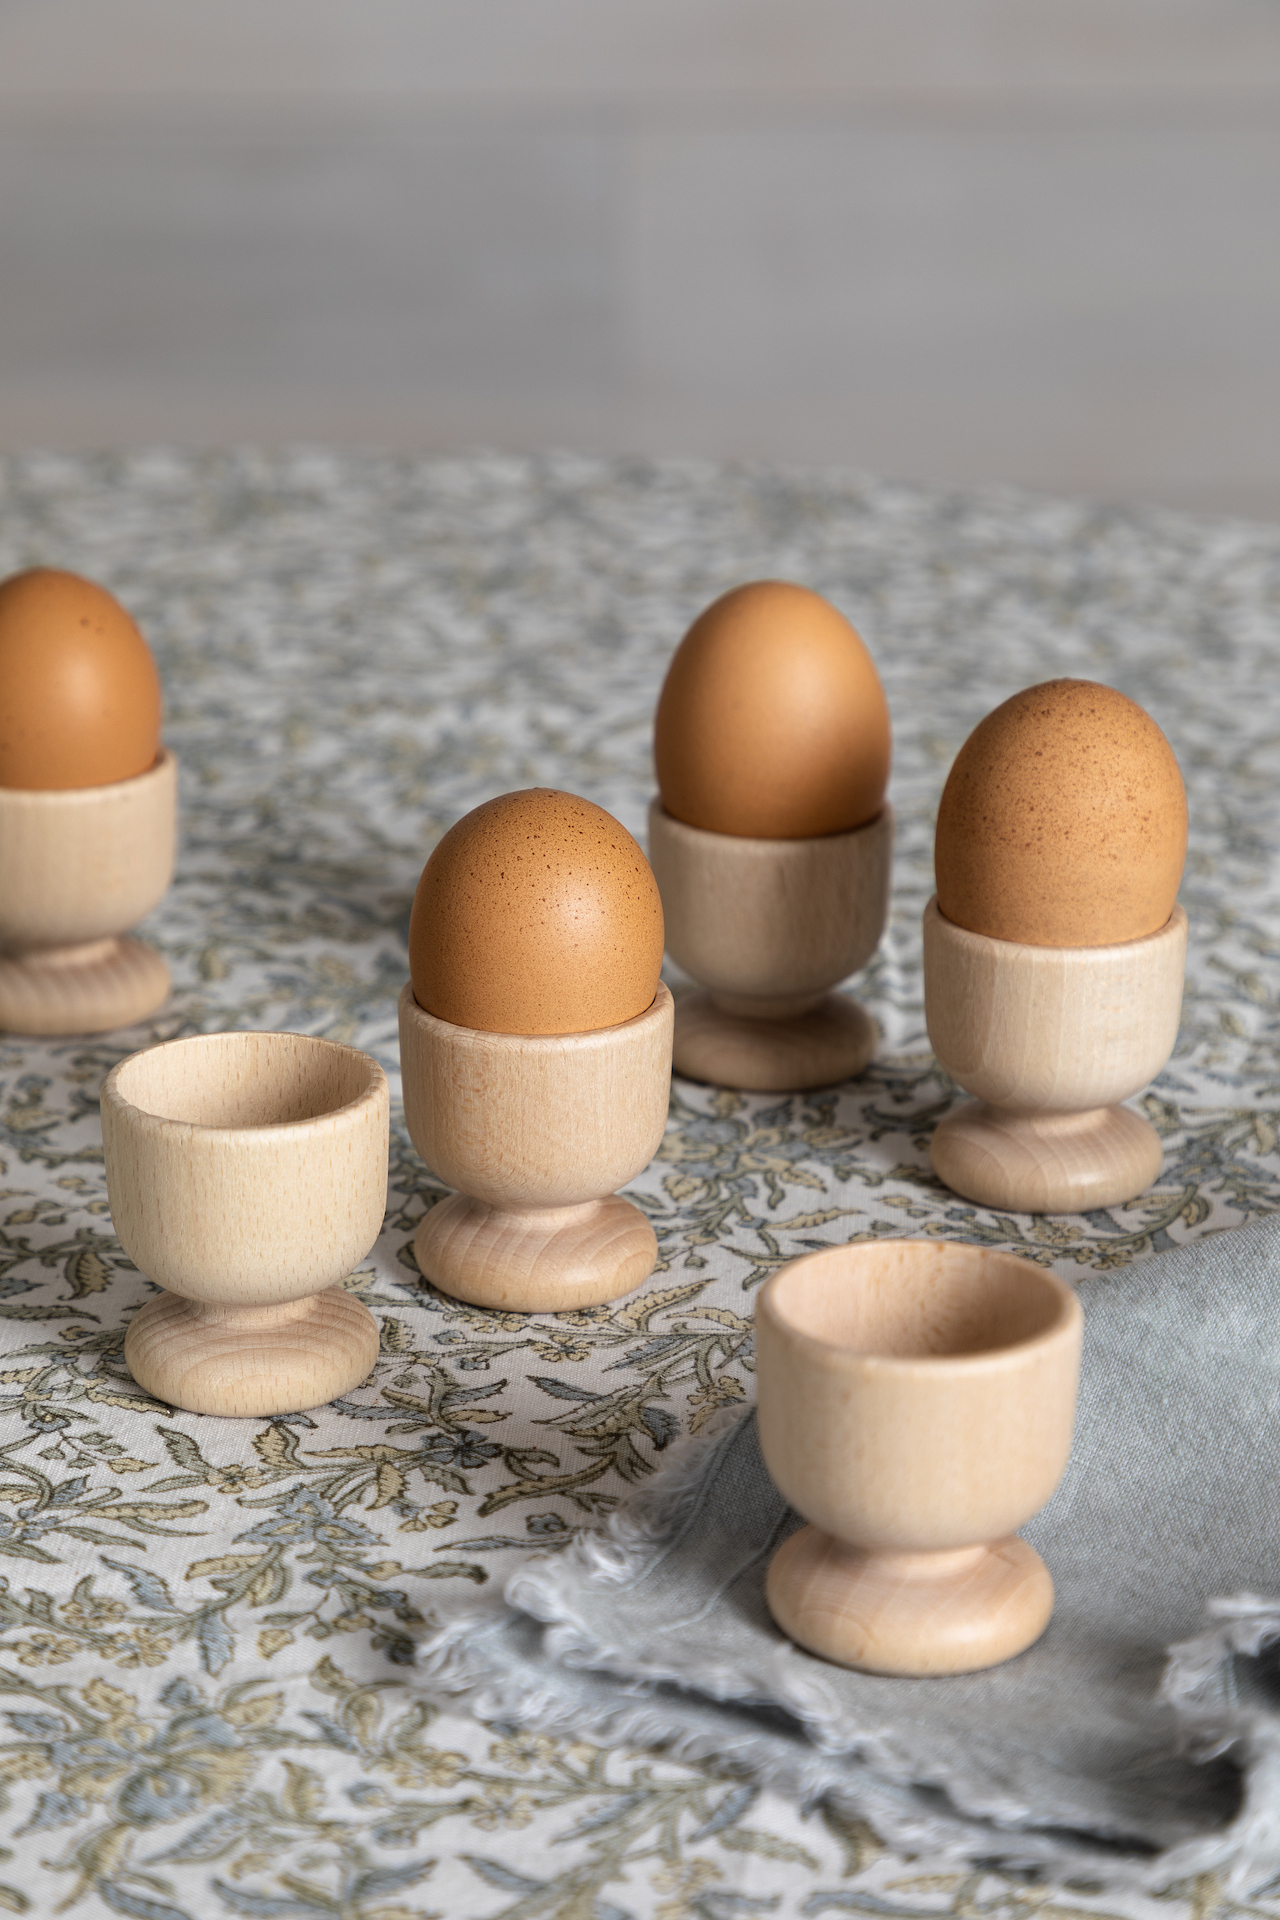 Eggs in wooden egg cup on blue floral tablecloth